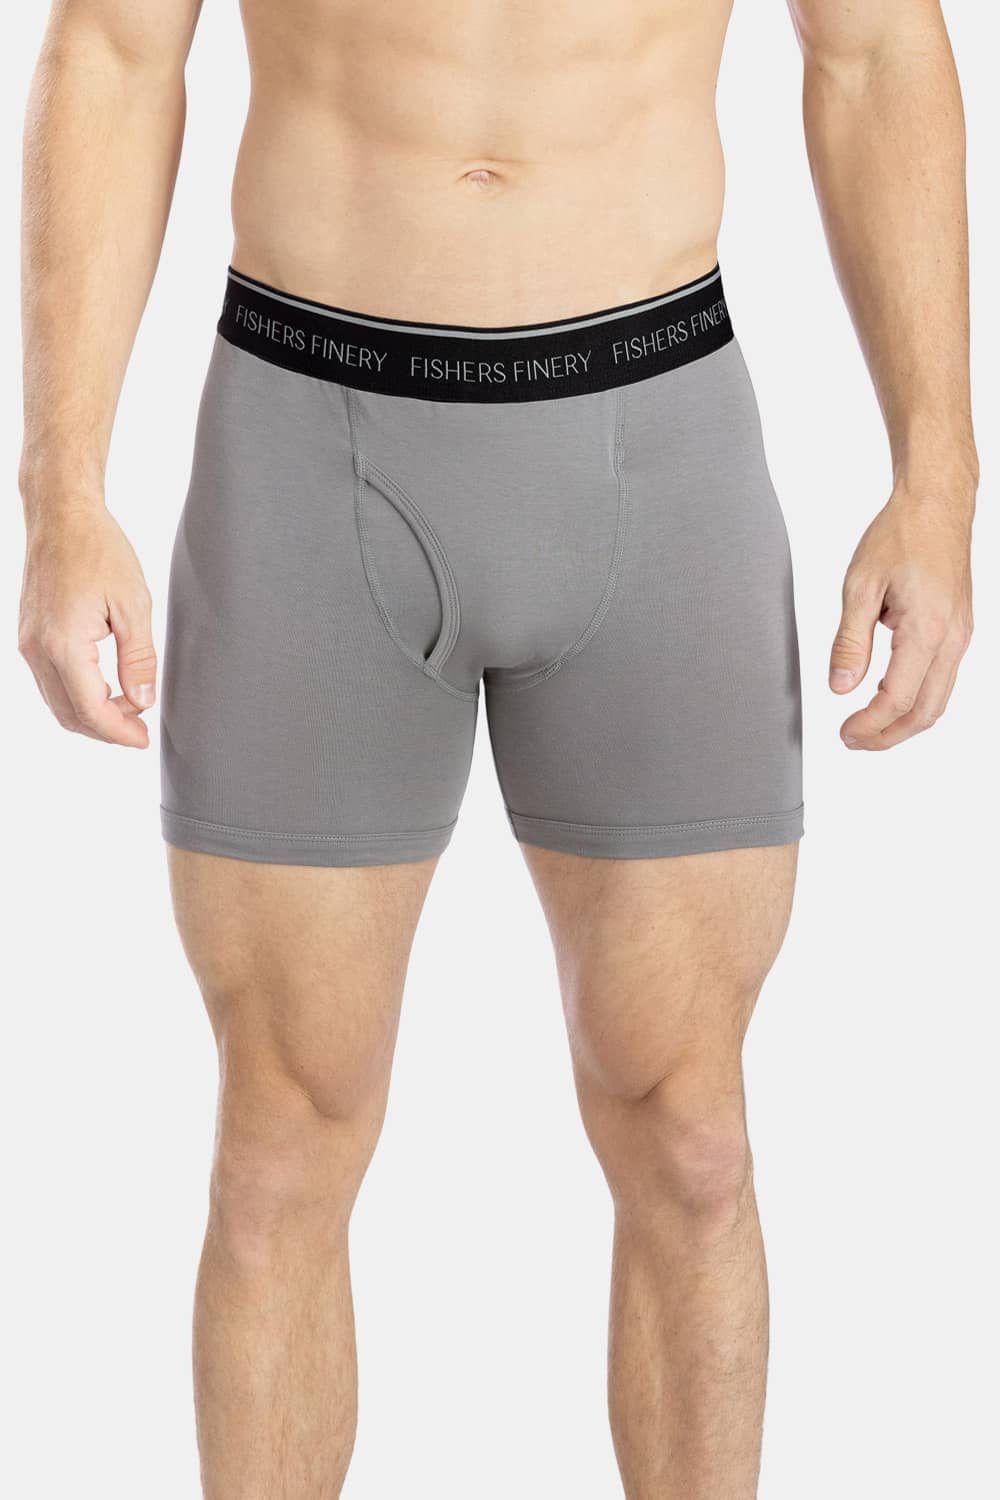 Fishers Finery Mens Modal Boxer Briefs Microfiber Althletic